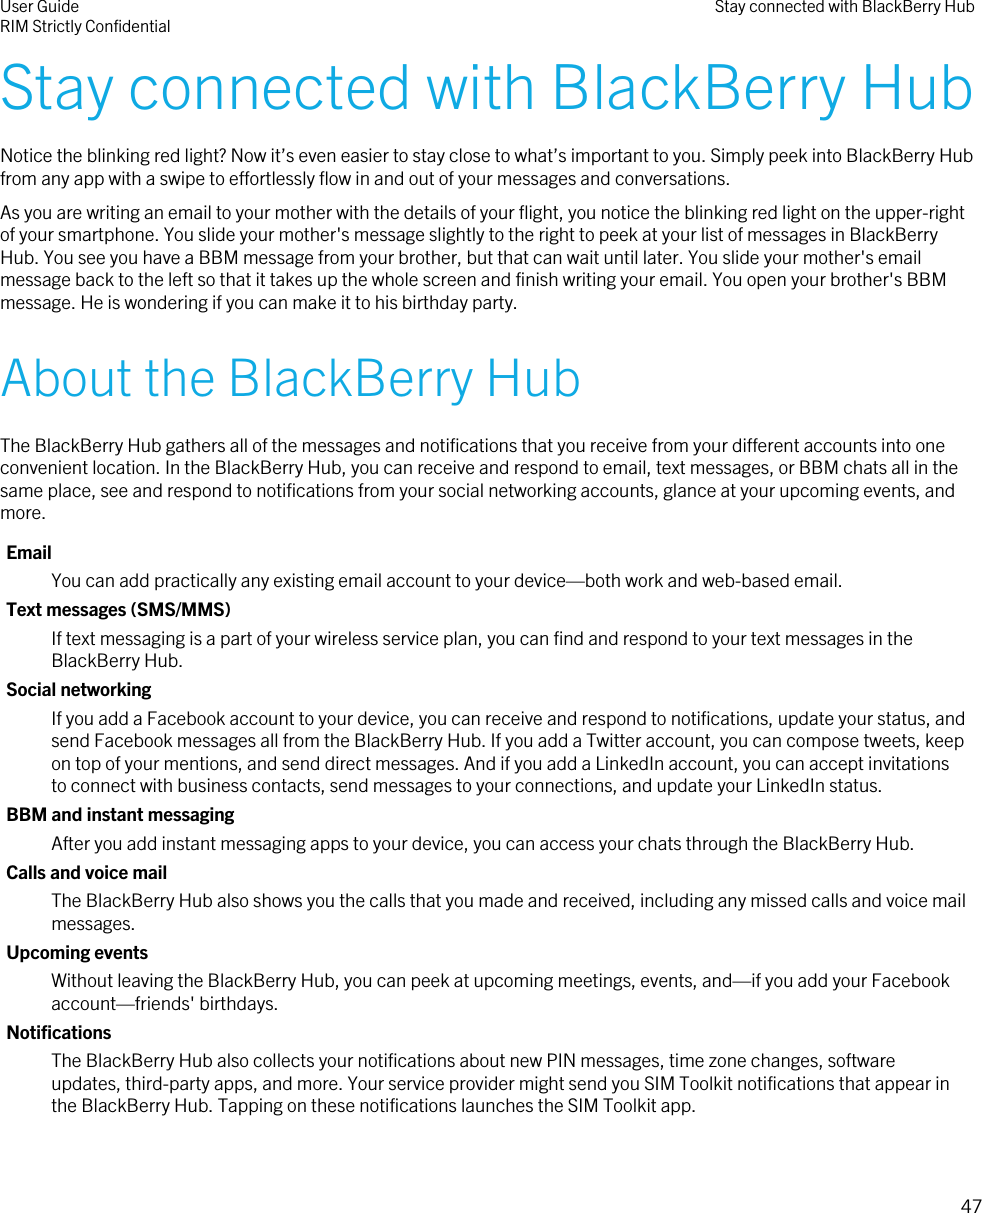 Stay connected with BlackBerry HubNotice the blinking red light? Now it’s even easier to stay close to what’s important to you. Simply peek into BlackBerry Hubfrom any app with a swipe to effortlessly flow in and out of your messages and conversations.As you are writing an email to your mother with the details of your flight, you notice the blinking red light on the upper-rightof your smartphone. You slide your mother&apos;s message slightly to the right to peek at your list of messages in BlackBerryHub. You see you have a BBM message from your brother, but that can wait until later. You slide your mother&apos;s emailmessage back to the left so that it takes up the whole screen and finish writing your email. You open your brother&apos;s BBMmessage. He is wondering if you can make it to his birthday party.About the BlackBerry HubThe BlackBerry Hub gathers all of the messages and notifications that you receive from your different accounts into oneconvenient location. In the BlackBerry Hub, you can receive and respond to email, text messages, or BBM chats all in thesame place, see and respond to notifications from your social networking accounts, glance at your upcoming events, andmore.EmailYou can add practically any existing email account to your device—both work and web-based email.Text messages (SMS/MMS)If text messaging is a part of your wireless service plan, you can find and respond to your text messages in theBlackBerry Hub.Social networkingIf you add a Facebook account to your device, you can receive and respond to notifications, update your status, andsend Facebook messages all from the BlackBerry Hub. If you add a Twitter account, you can compose tweets, keepon top of your mentions, and send direct messages. And if you add a LinkedIn account, you can accept invitationsto connect with business contacts, send messages to your connections, and update your LinkedIn status.BBM and instant messagingAfter you add instant messaging apps to your device, you can access your chats through the BlackBerry Hub.Calls and voice mailThe BlackBerry Hub also shows you the calls that you made and received, including any missed calls and voice mailmessages.Upcoming eventsWithout leaving the BlackBerry Hub, you can peek at upcoming meetings, events, and—if you add your Facebookaccount—friends&apos; birthdays.NotificationsThe BlackBerry Hub also collects your notifications about new PIN messages, time zone changes, softwareupdates, third-party apps, and more. Your service provider might send you SIM Toolkit notifications that appear inthe BlackBerry Hub. Tapping on these notifications launches the SIM Toolkit app.User GuideRIM Strictly Confidential Stay connected with BlackBerry Hub47